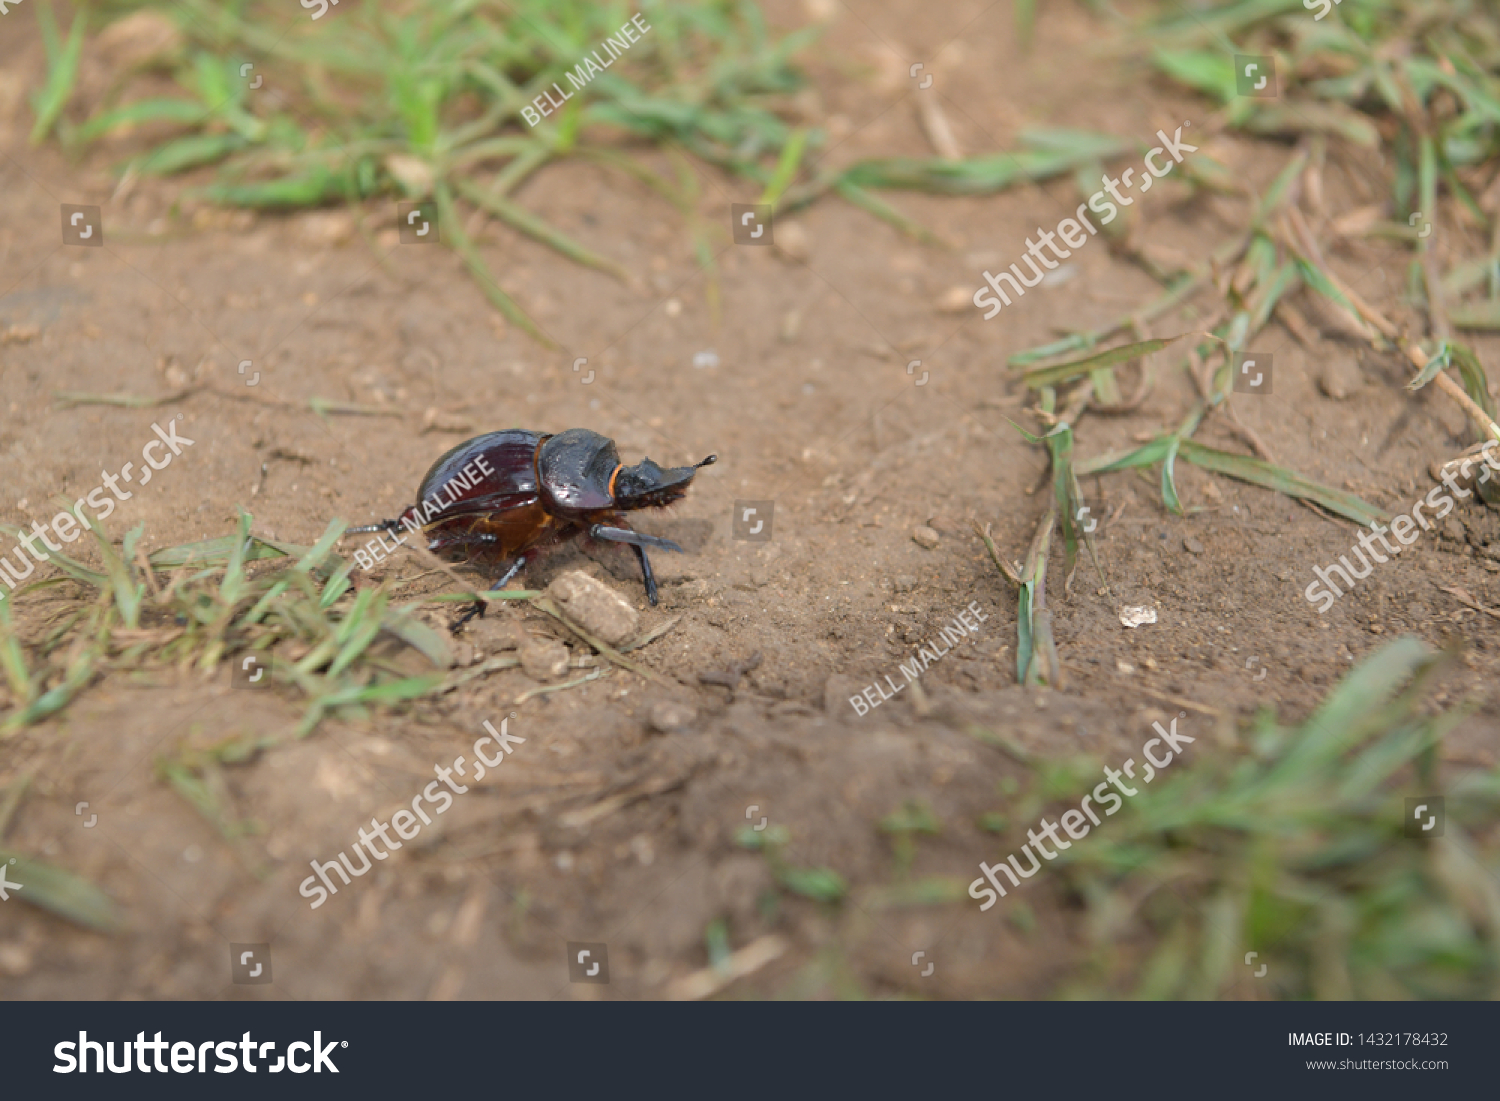 black beetle crawling on soil and grass,Beetles in nature. #1432178432